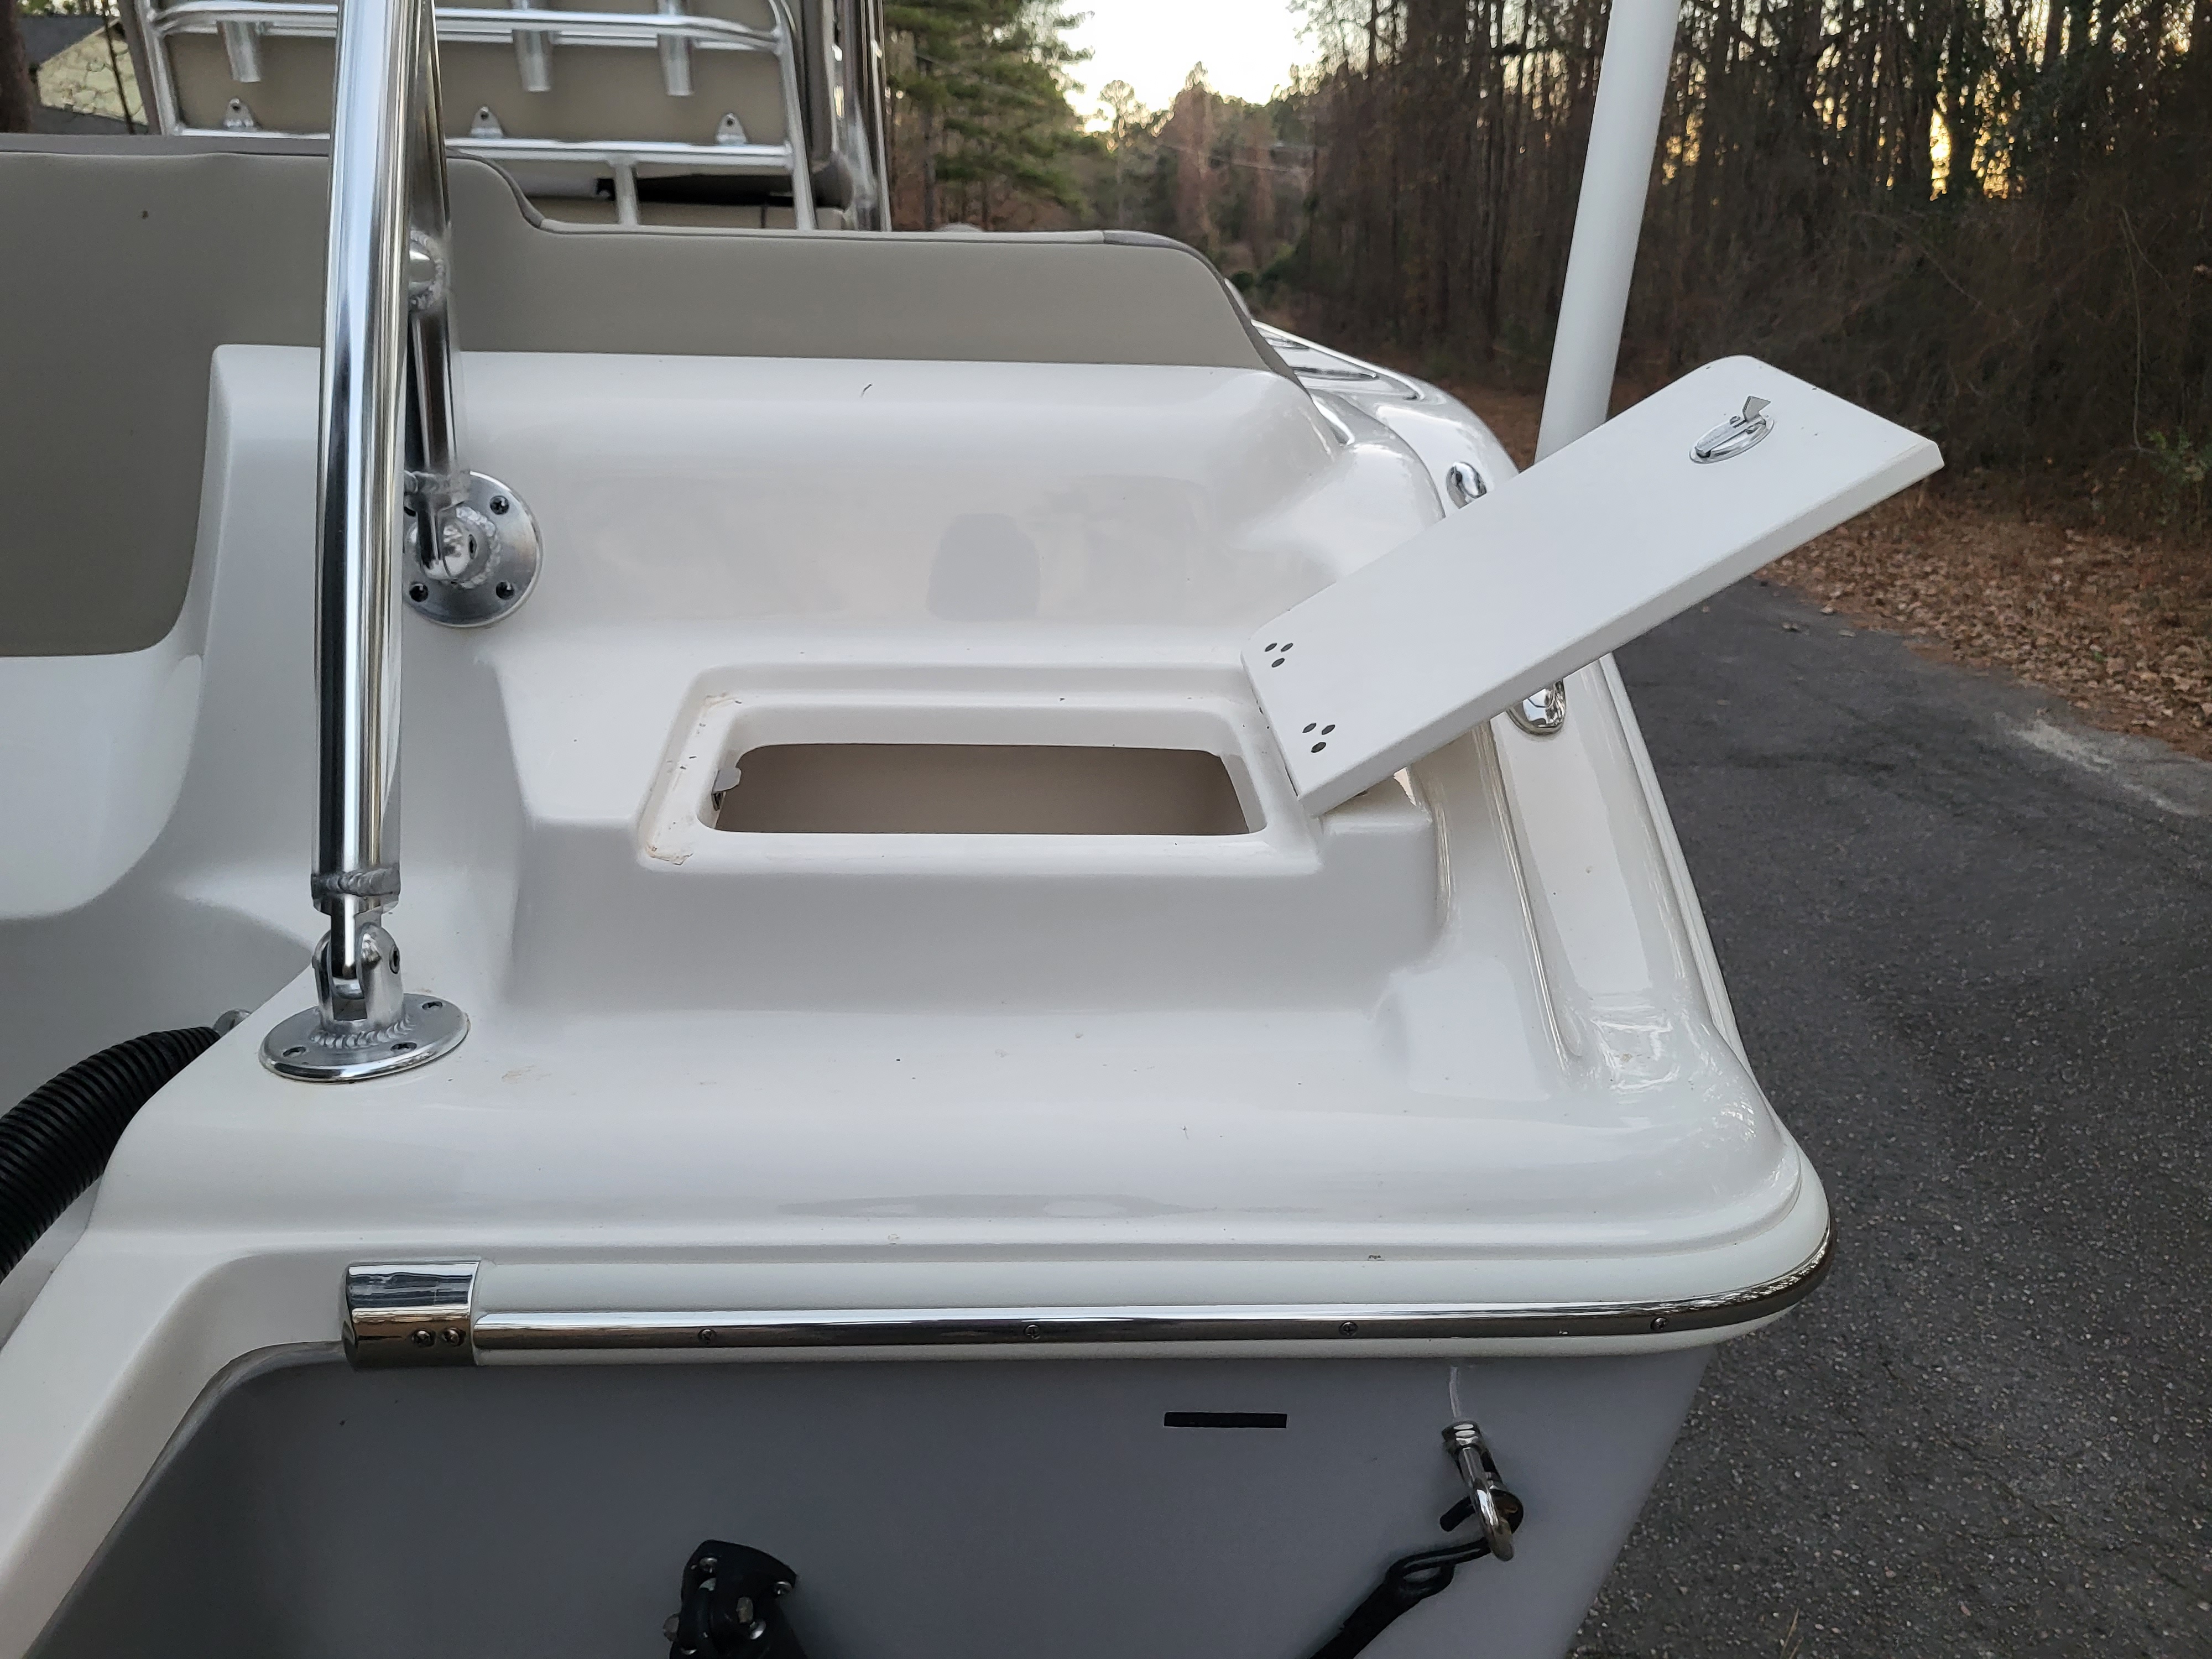 2022 Key West 239FS Power boat for sale in Laurinburg, NC - image 28 